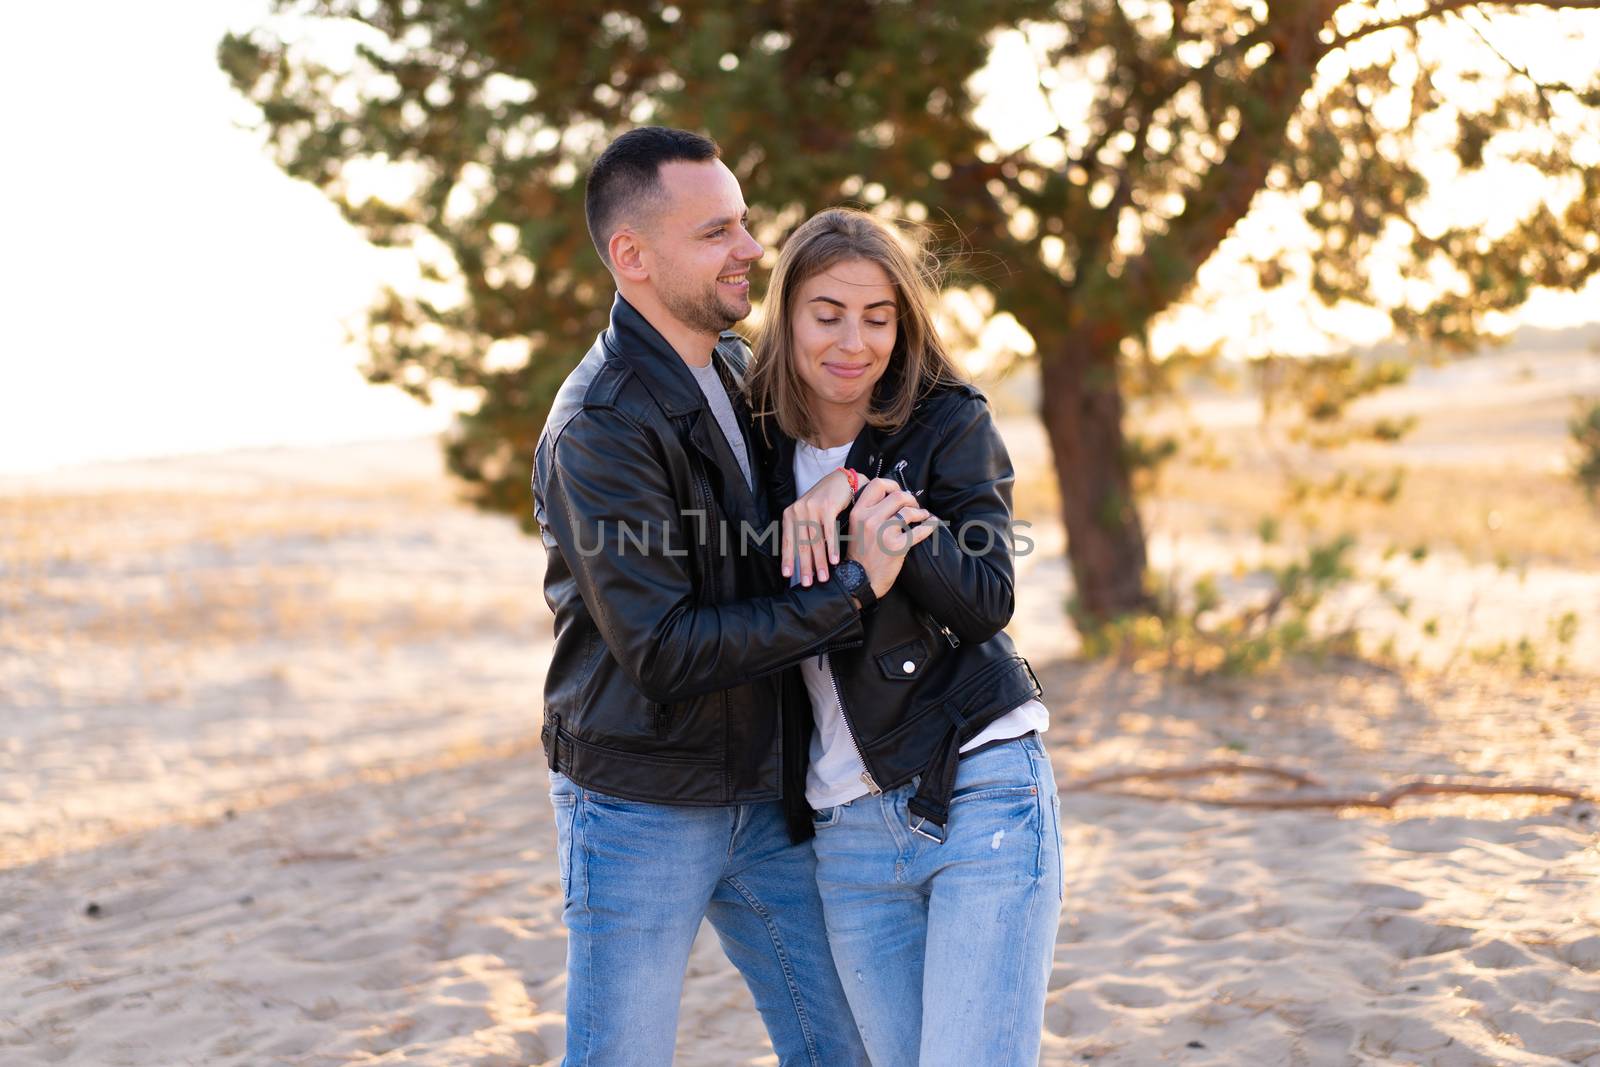 Happy and cute adorable adult couple leather jacket and jeans man with woman girlfriend walking, have fun play, laugh,smile and jump on sunset at desert crazy in love, emotions and relationship